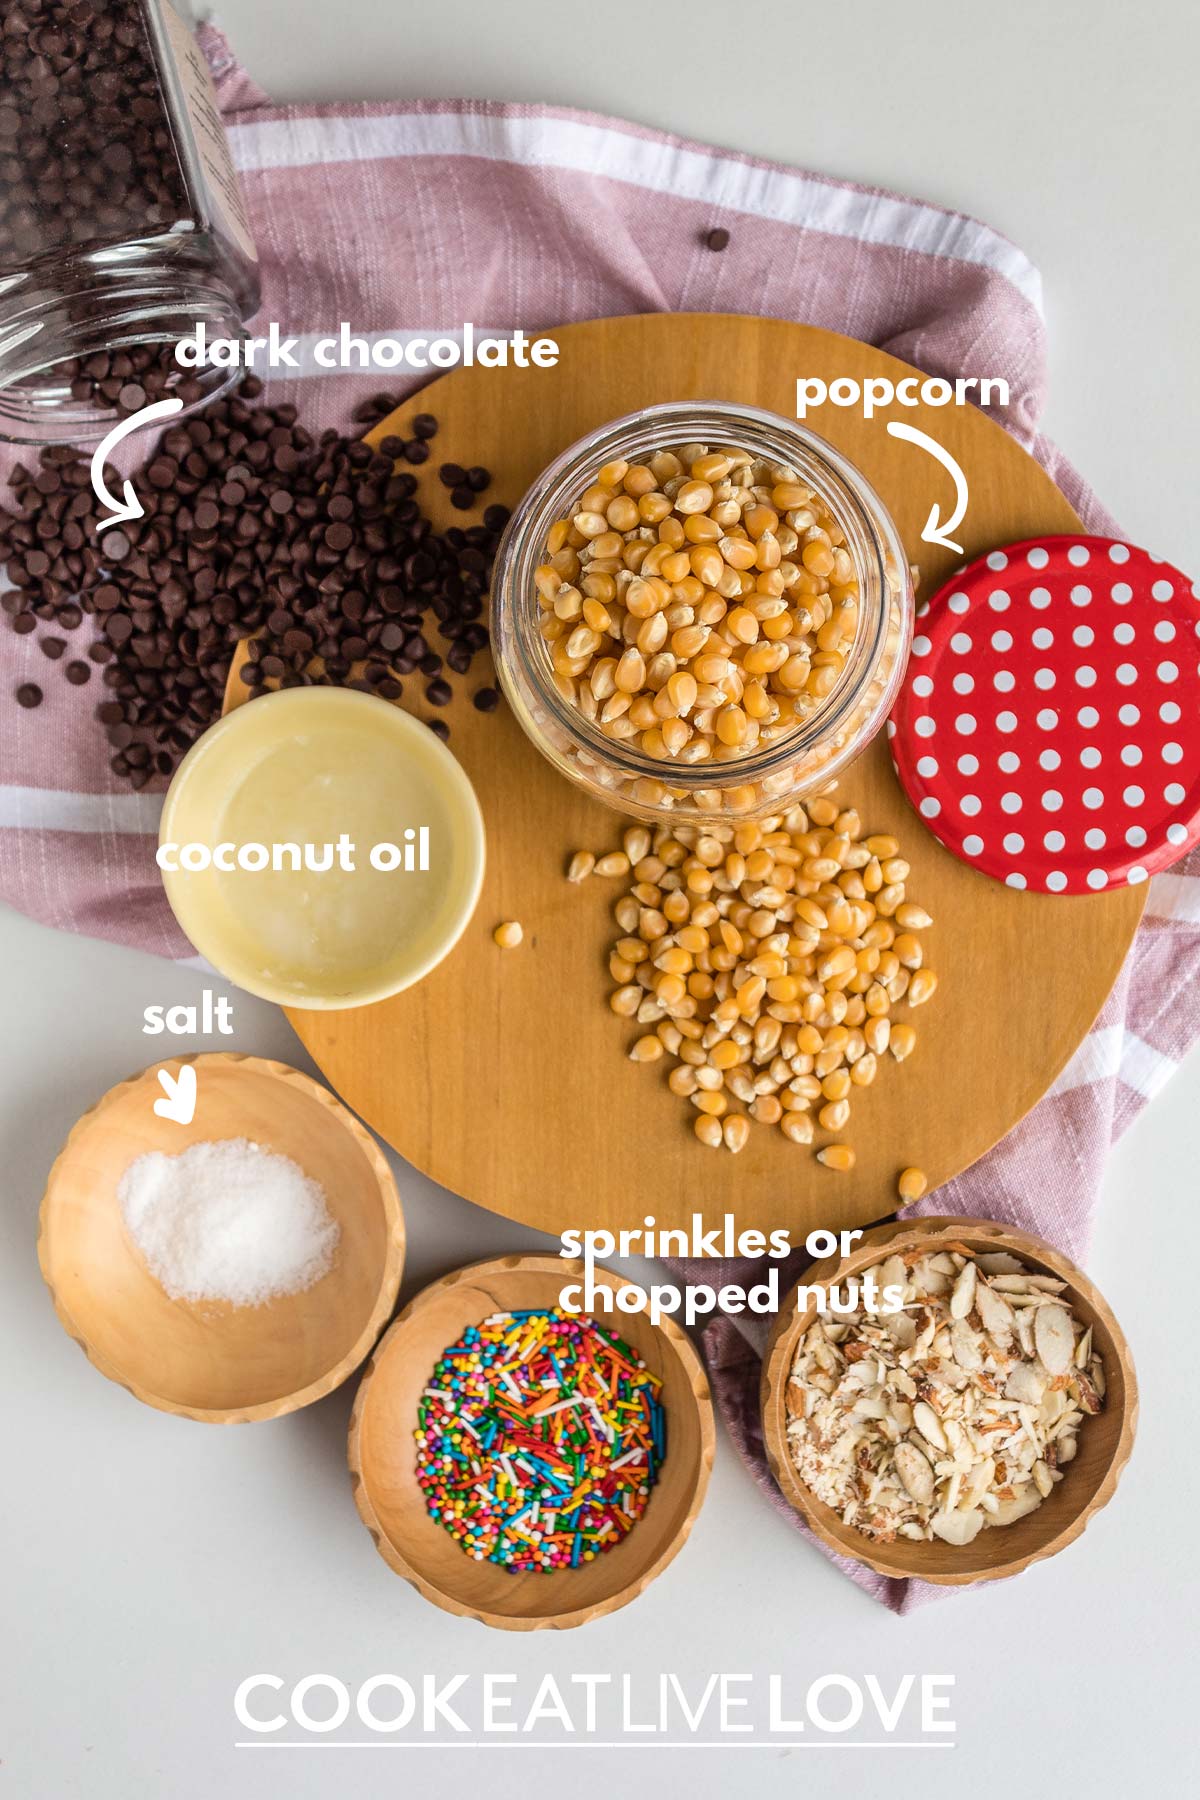 Ingredients to make chocolate drizzled popcorn on the table.